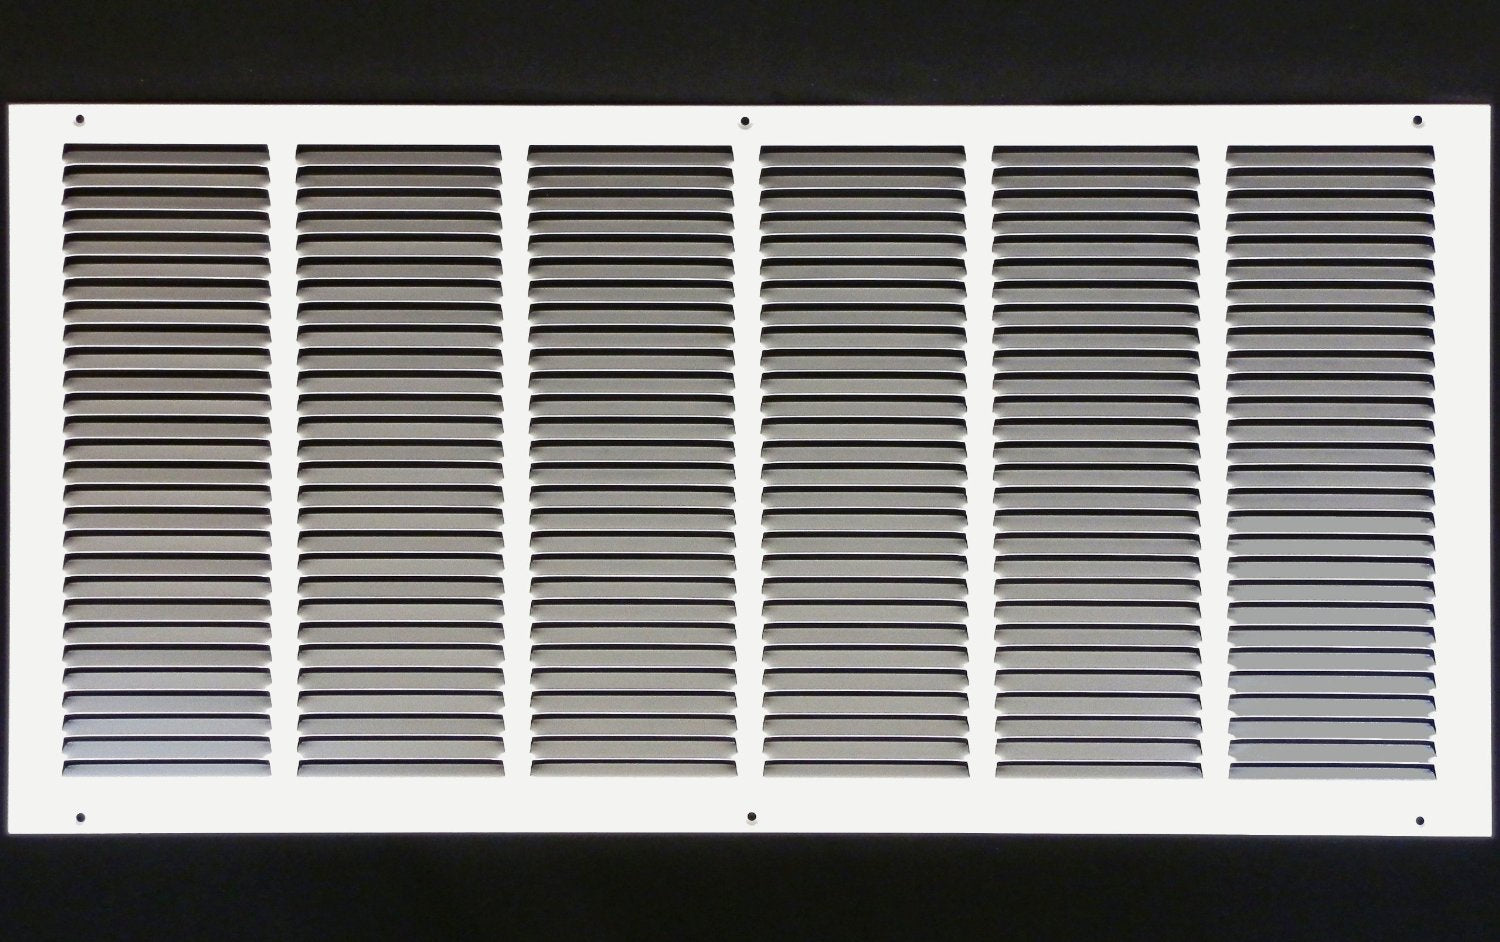 30" X 12" Air Vent Return Grilles - Sidewall and Ceiling - Steel